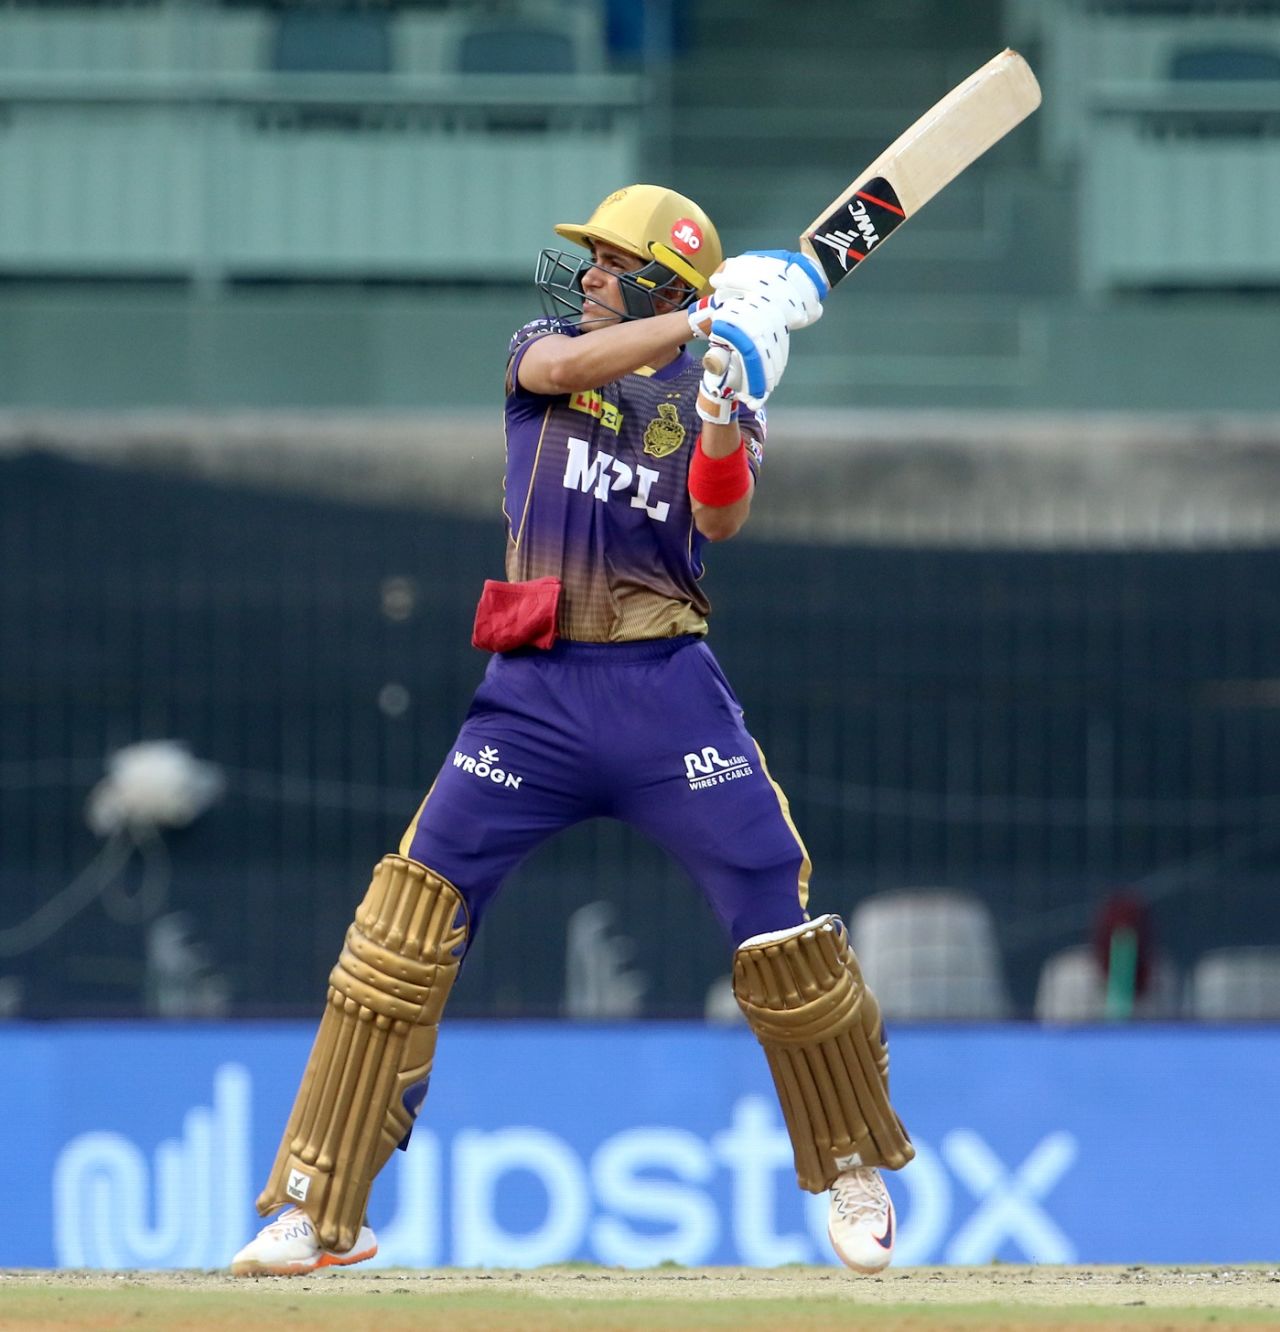 Shubman Gill smashes one over the off-side infield, Royal Challengers Bangalore vs Kolkata Knight Riders, IPL 2021, Chennai, April 18, 2021